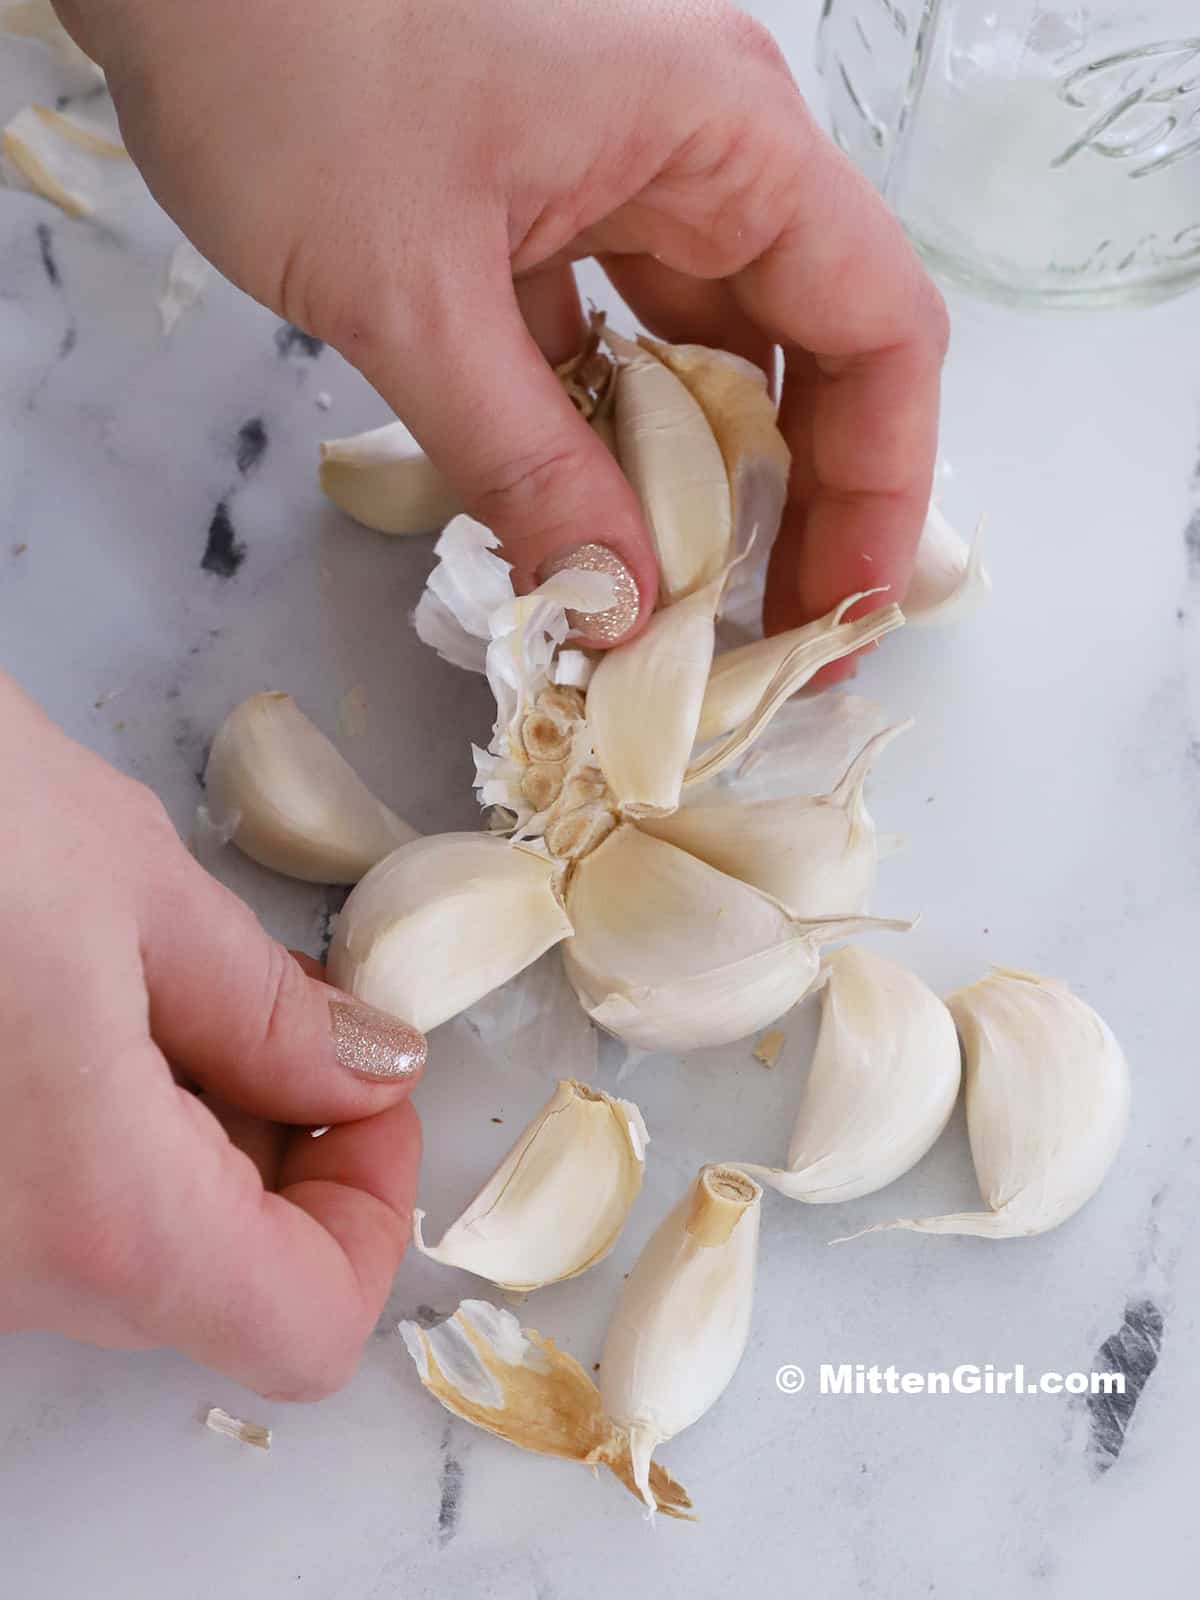 Hands separating out cloves of garlic.